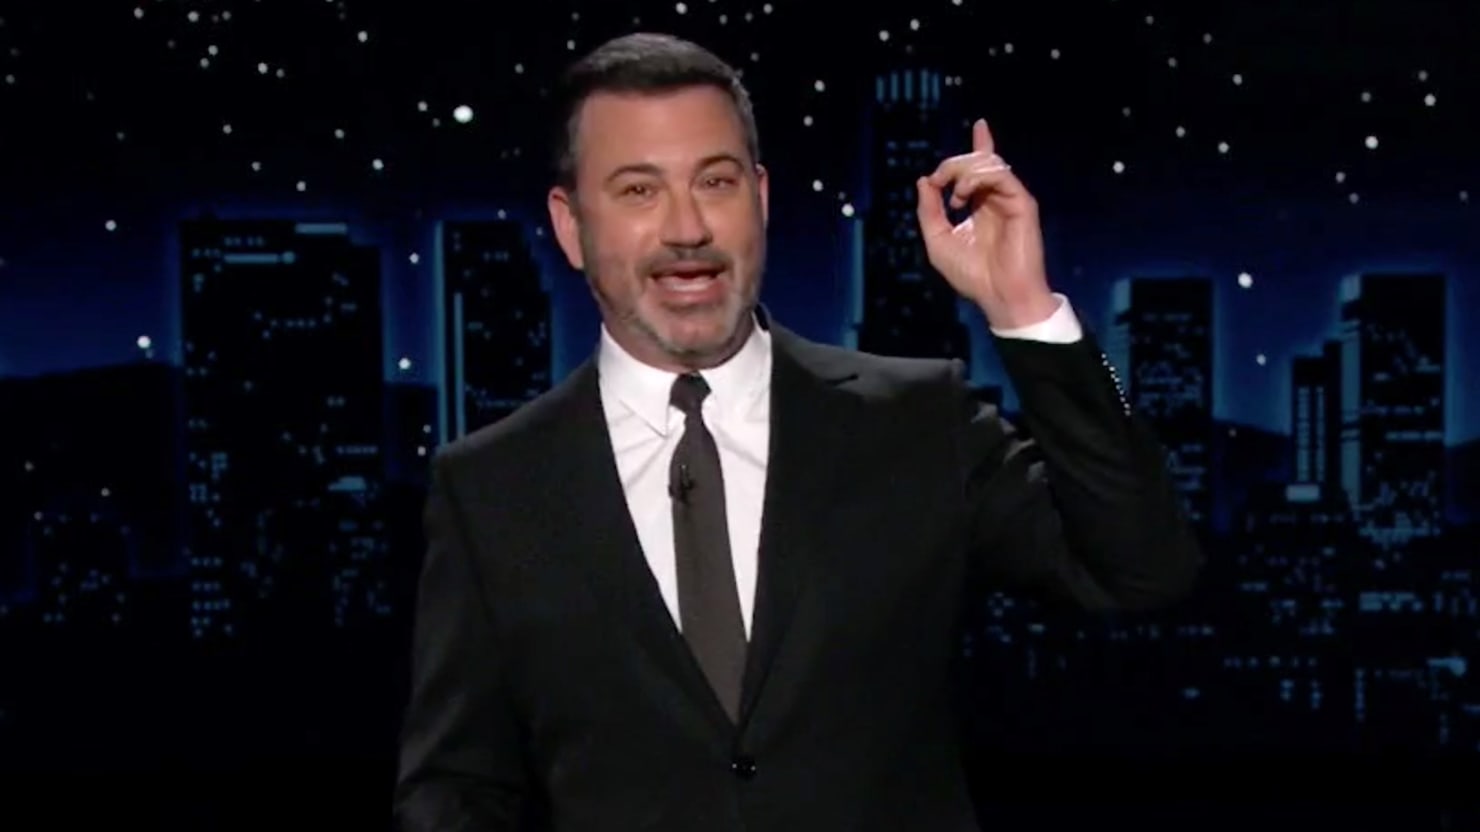 Jimmy Kimmel has an absolute field day with the Ted Cruz saga in Cancún